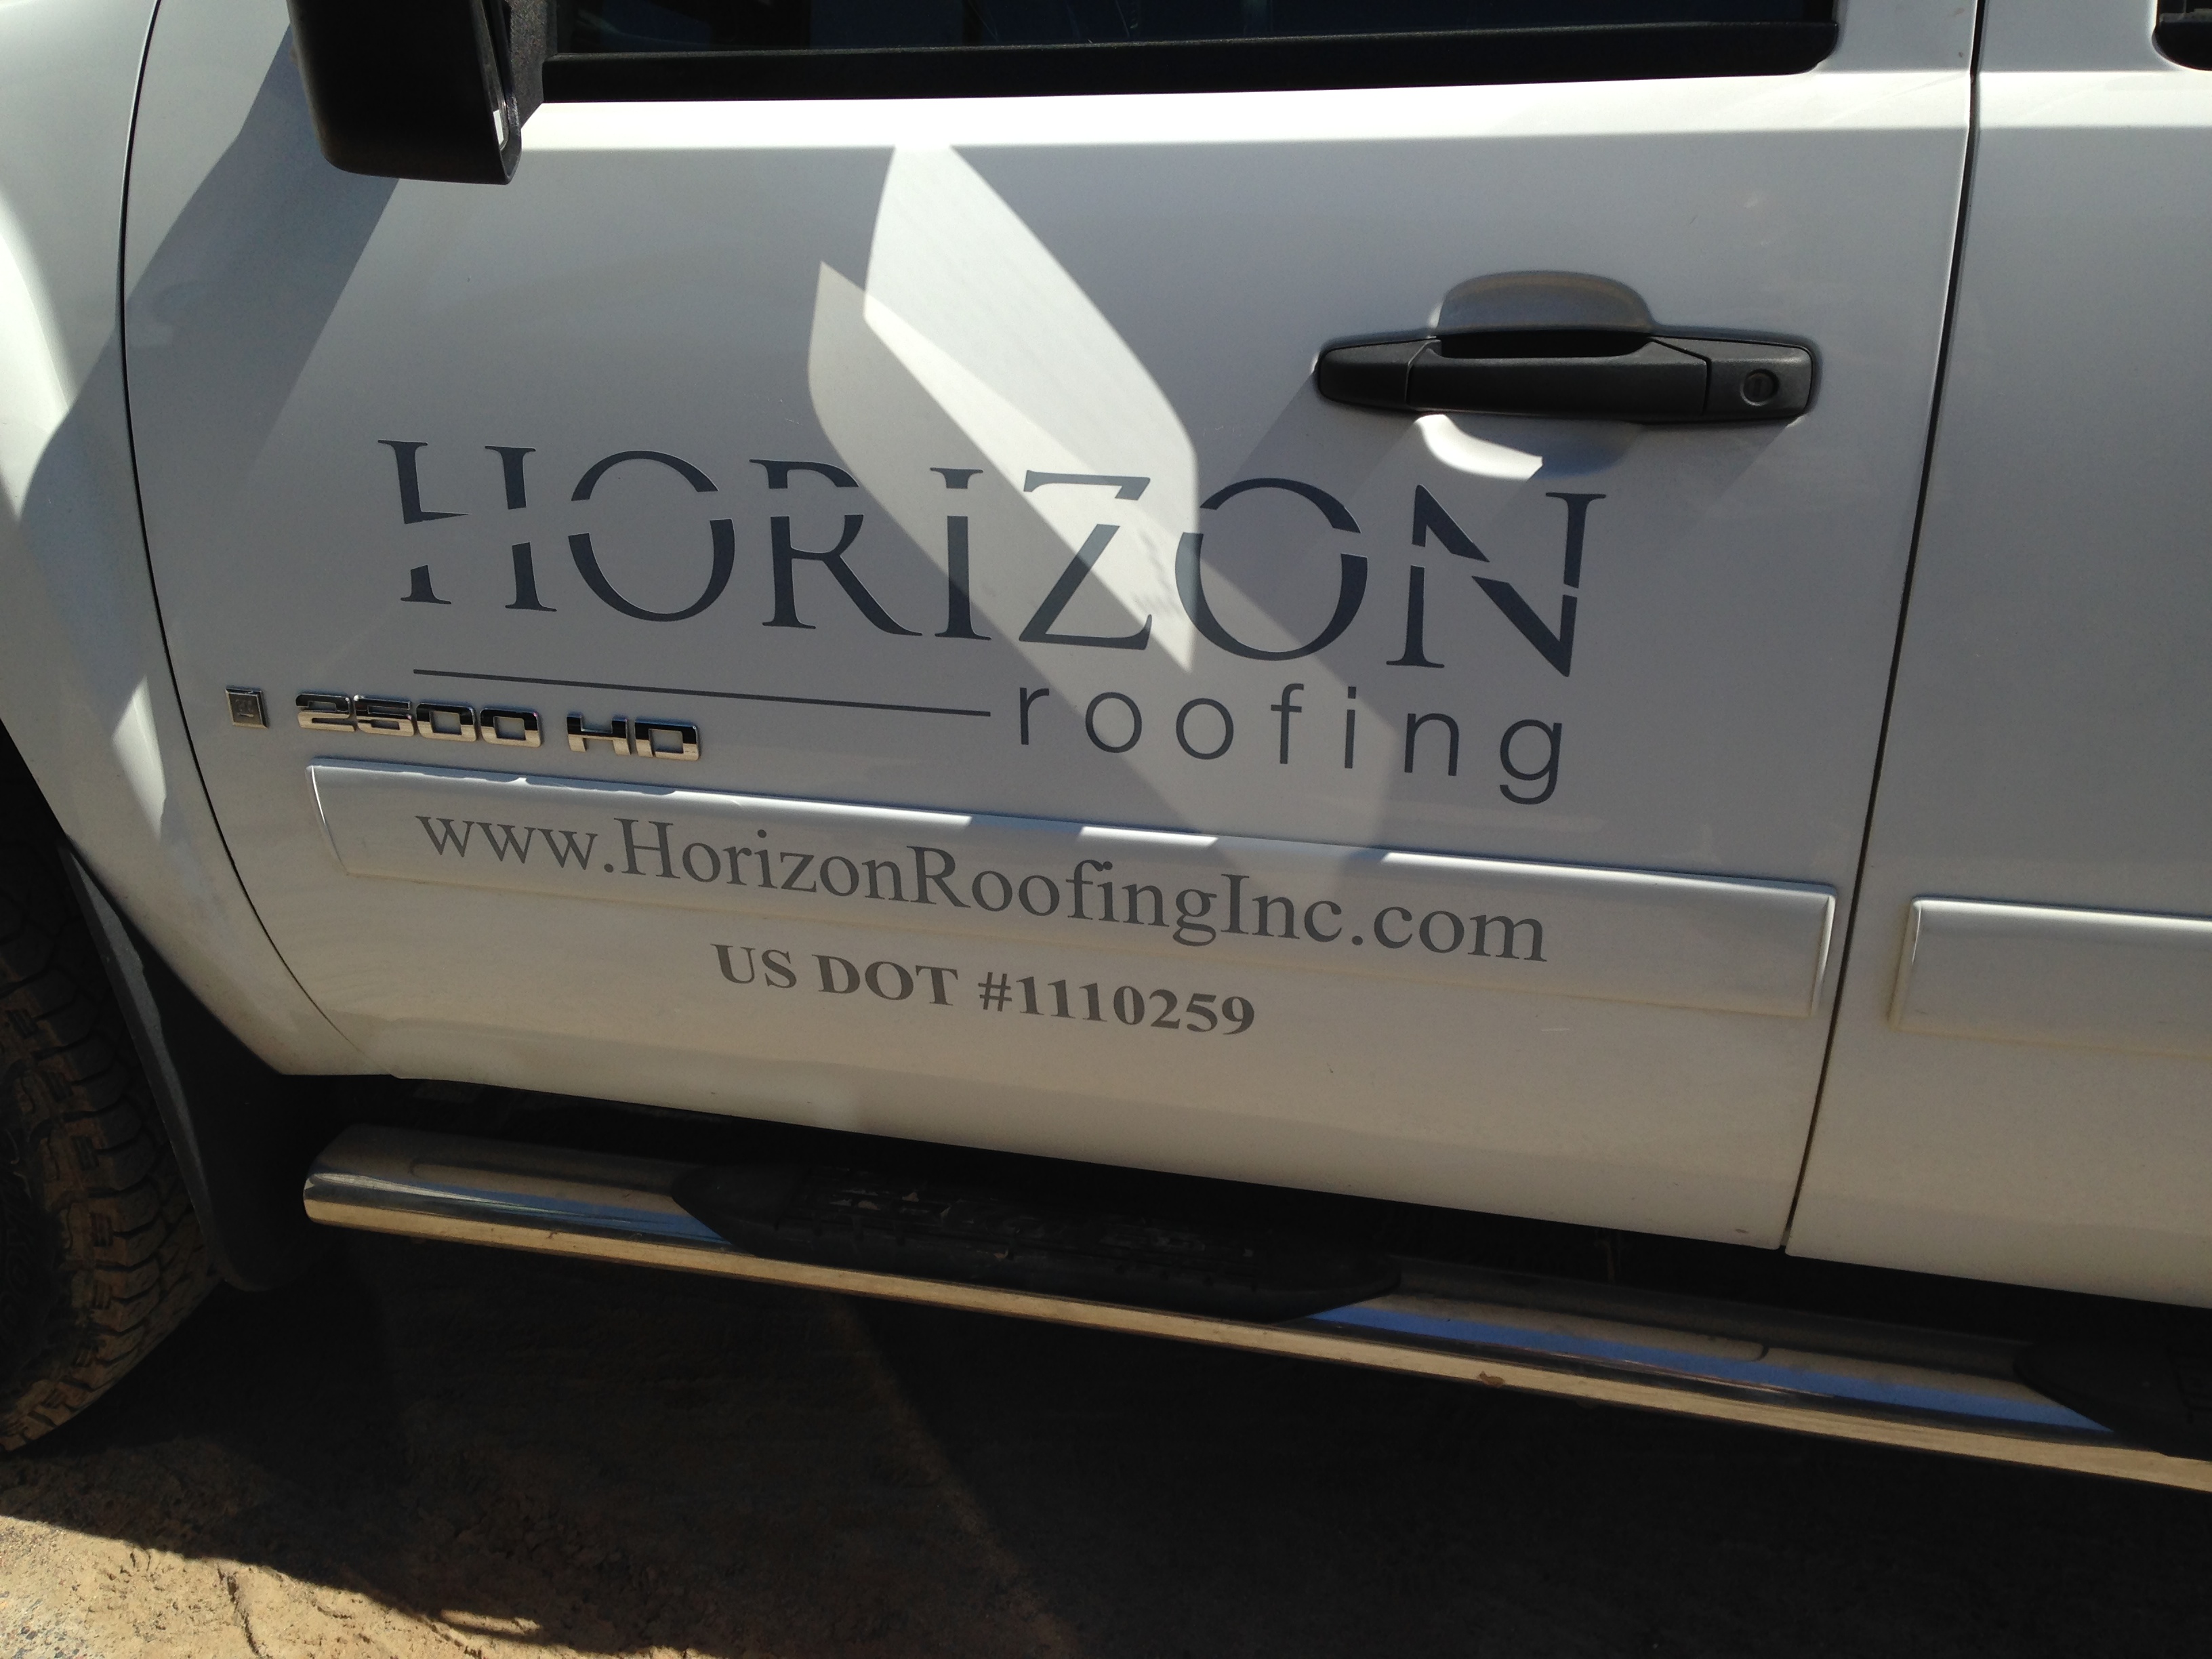 Custom Signs for Horizon Roofing | Signmax.com